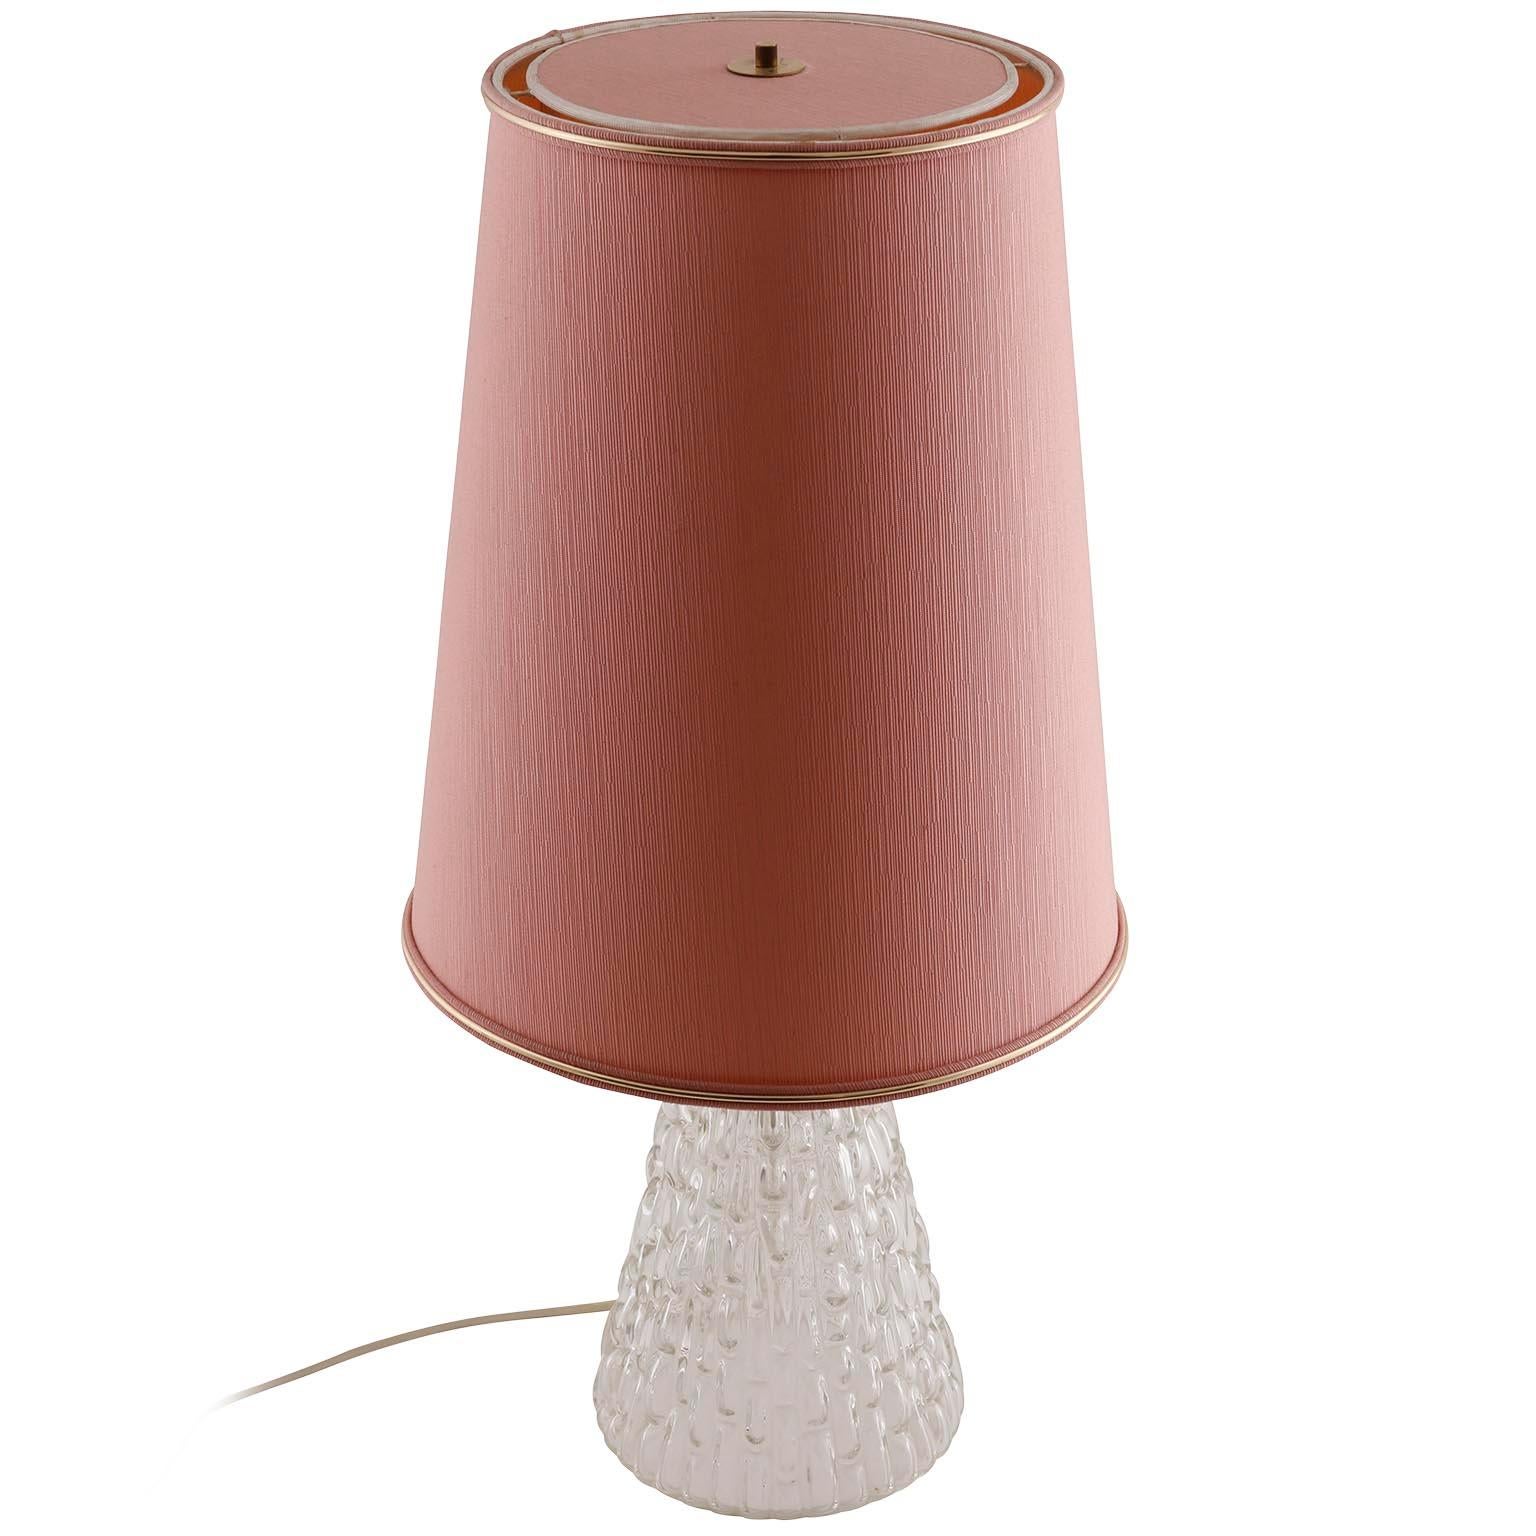 A large table lamp by Rupert Nikoll, Vienna, Austria, manufactured in midcentury, circa 1960 (late 1950s or 1960s).
The textured glass base has a bulb socket for a small screw base bulb (E14 candelabra) inside. The pink or old rose original lamp